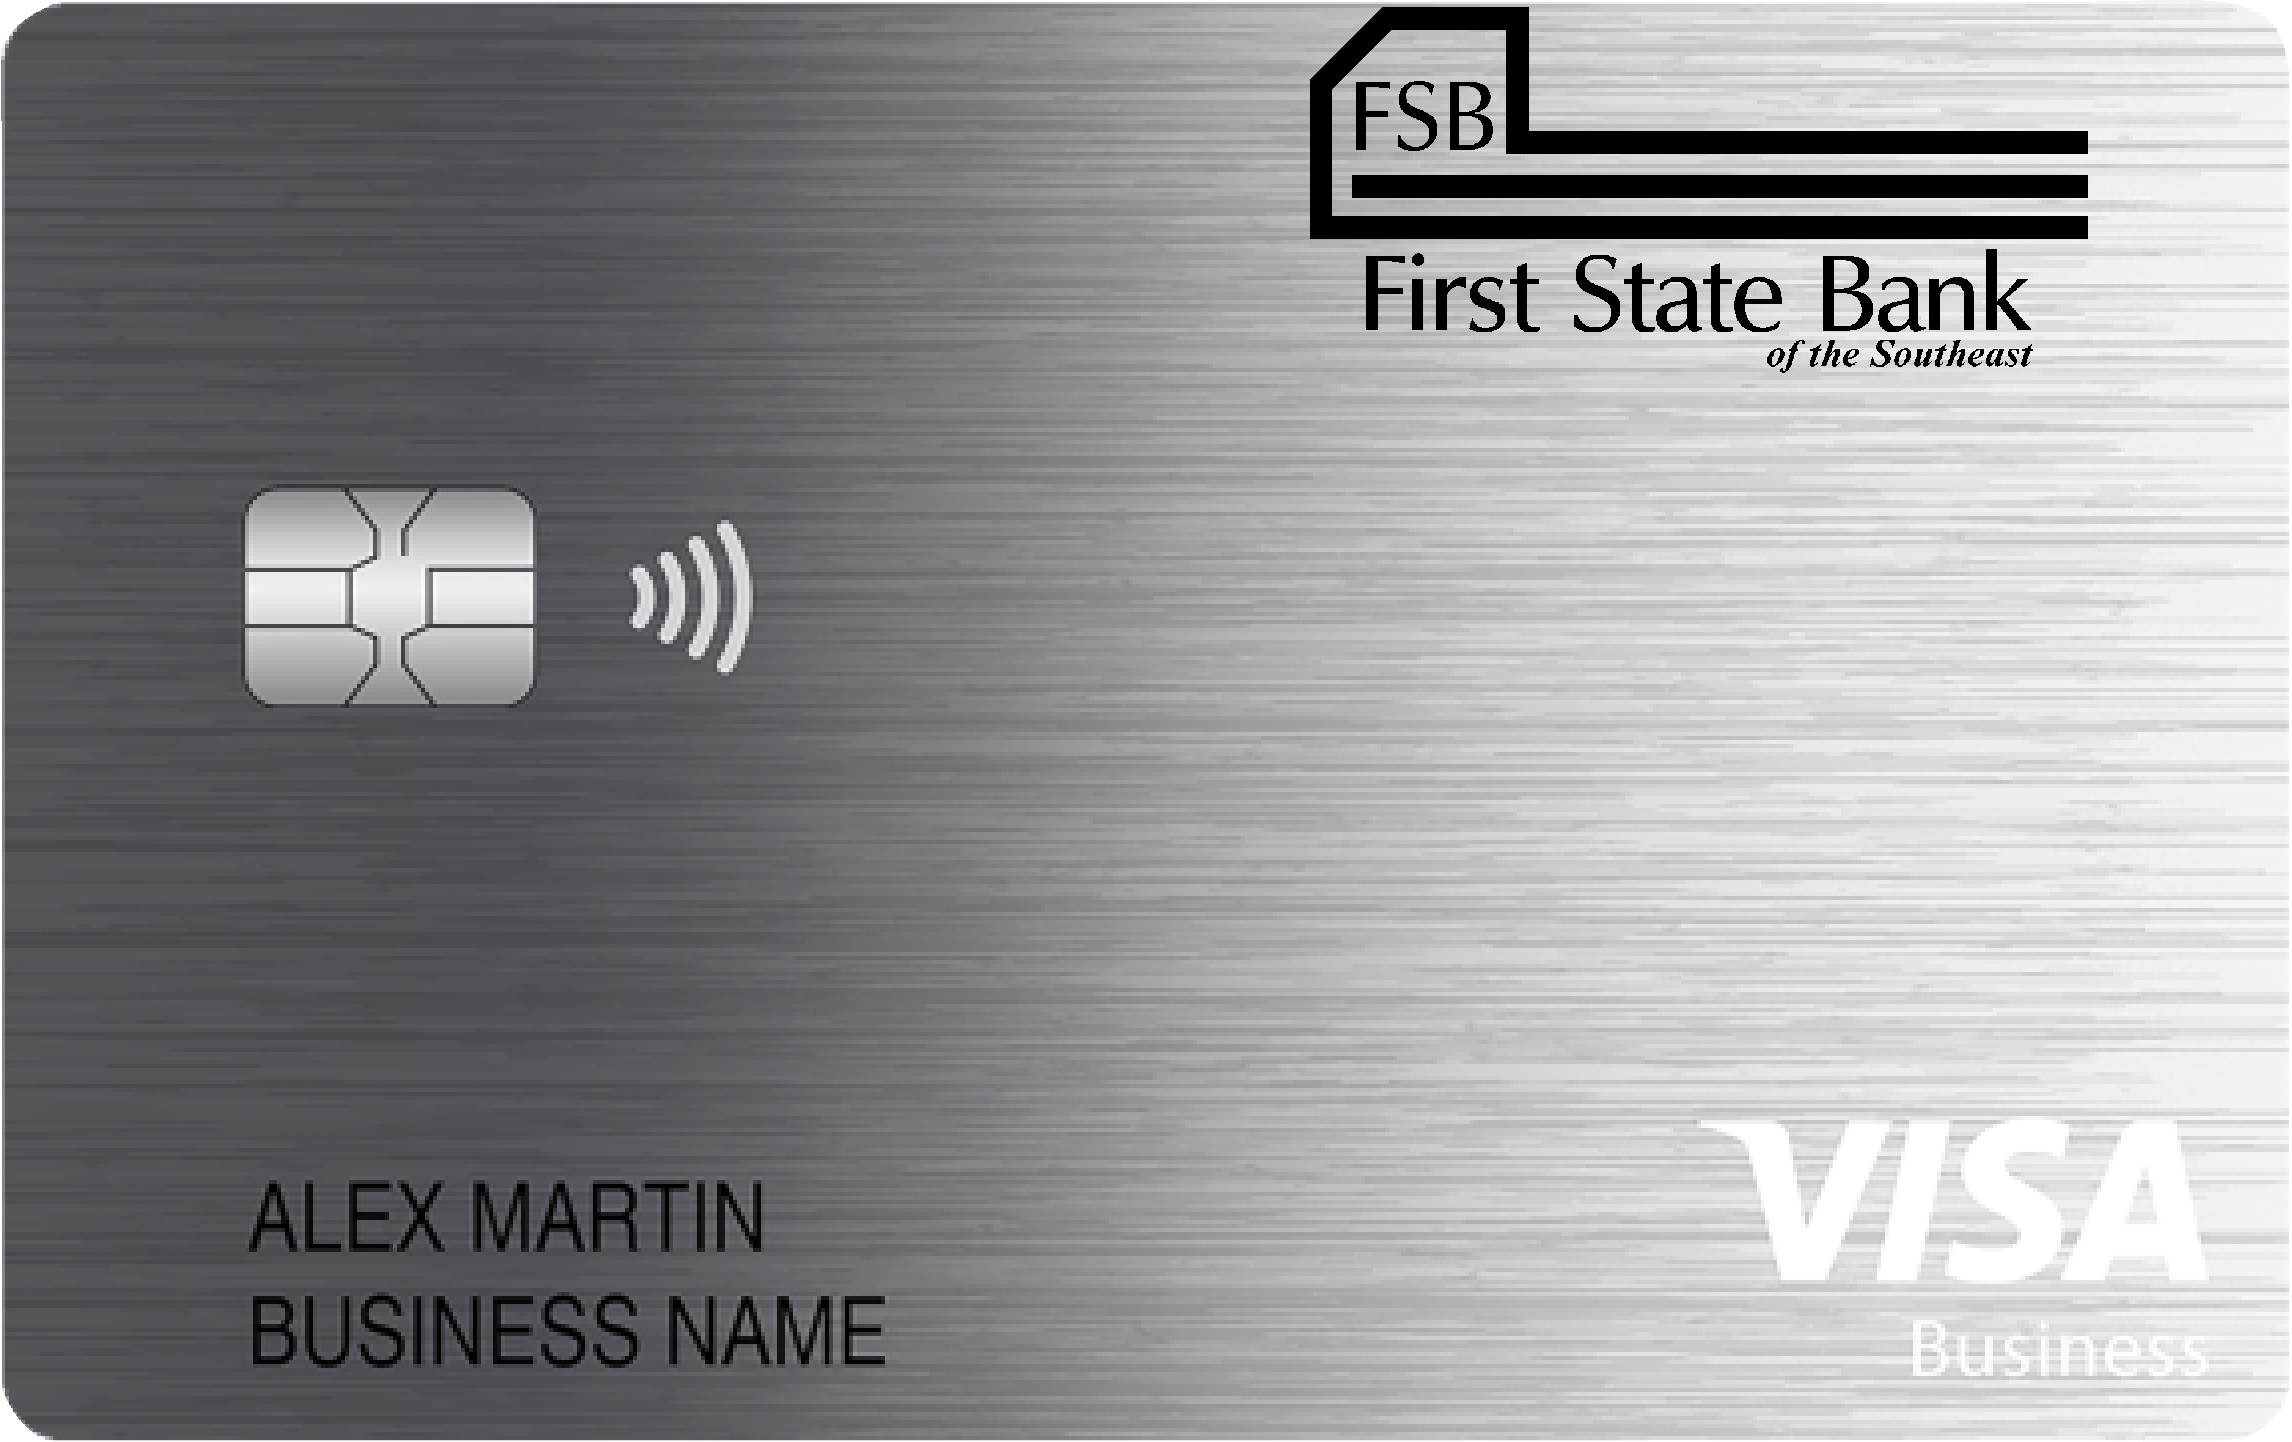 First State Bank of the Southeast Business Card Card